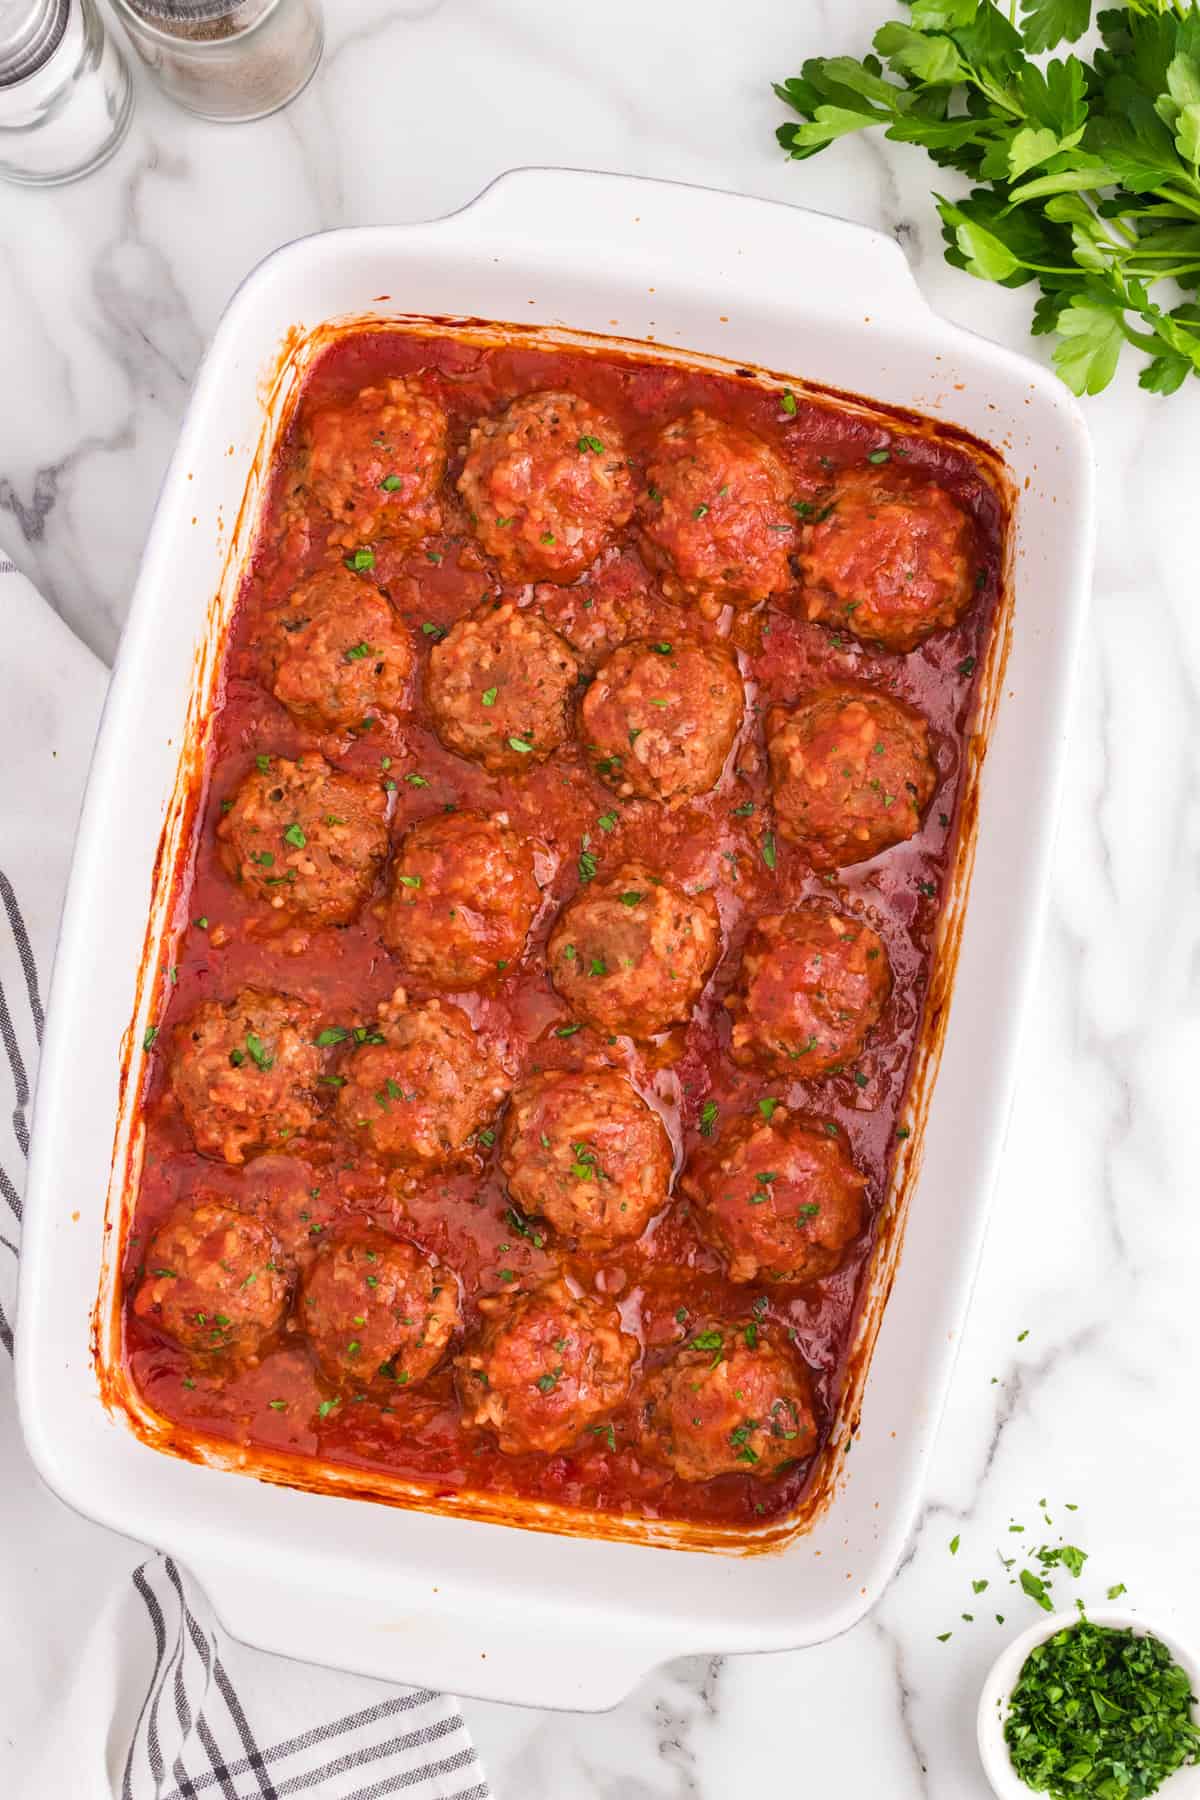 Porcupine Meatballs in 9x13 baking dish hot out of the oven